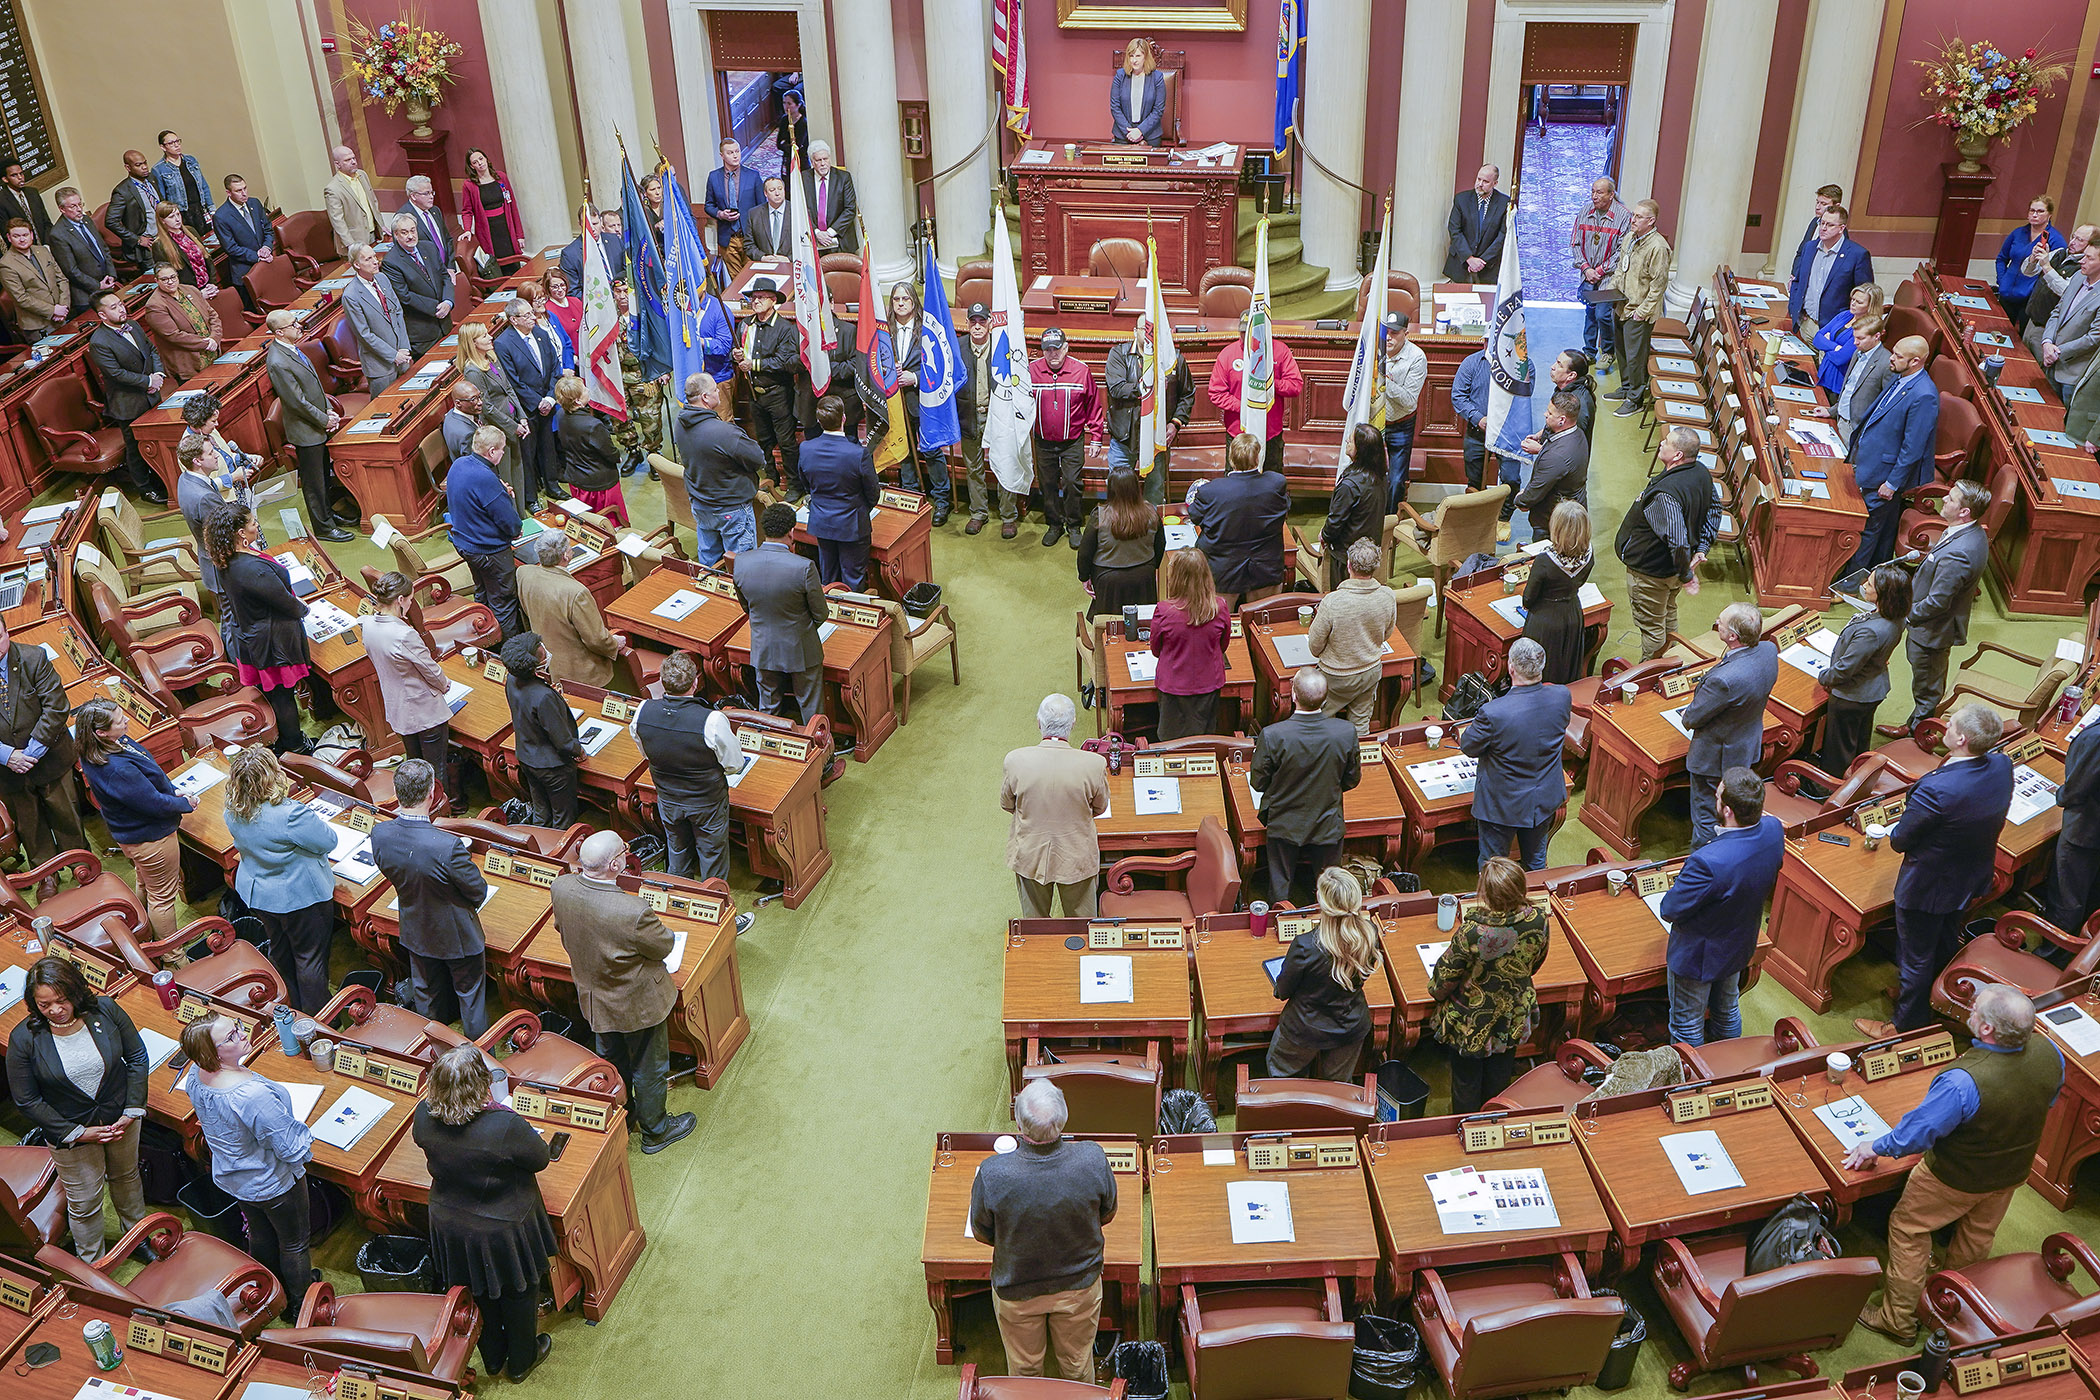 Tribal flagbearers surround the rostrum after a procession into the House Chamber to open Sovereignty Day at the Capitol March 13. (Photo by Andrew VonBank)